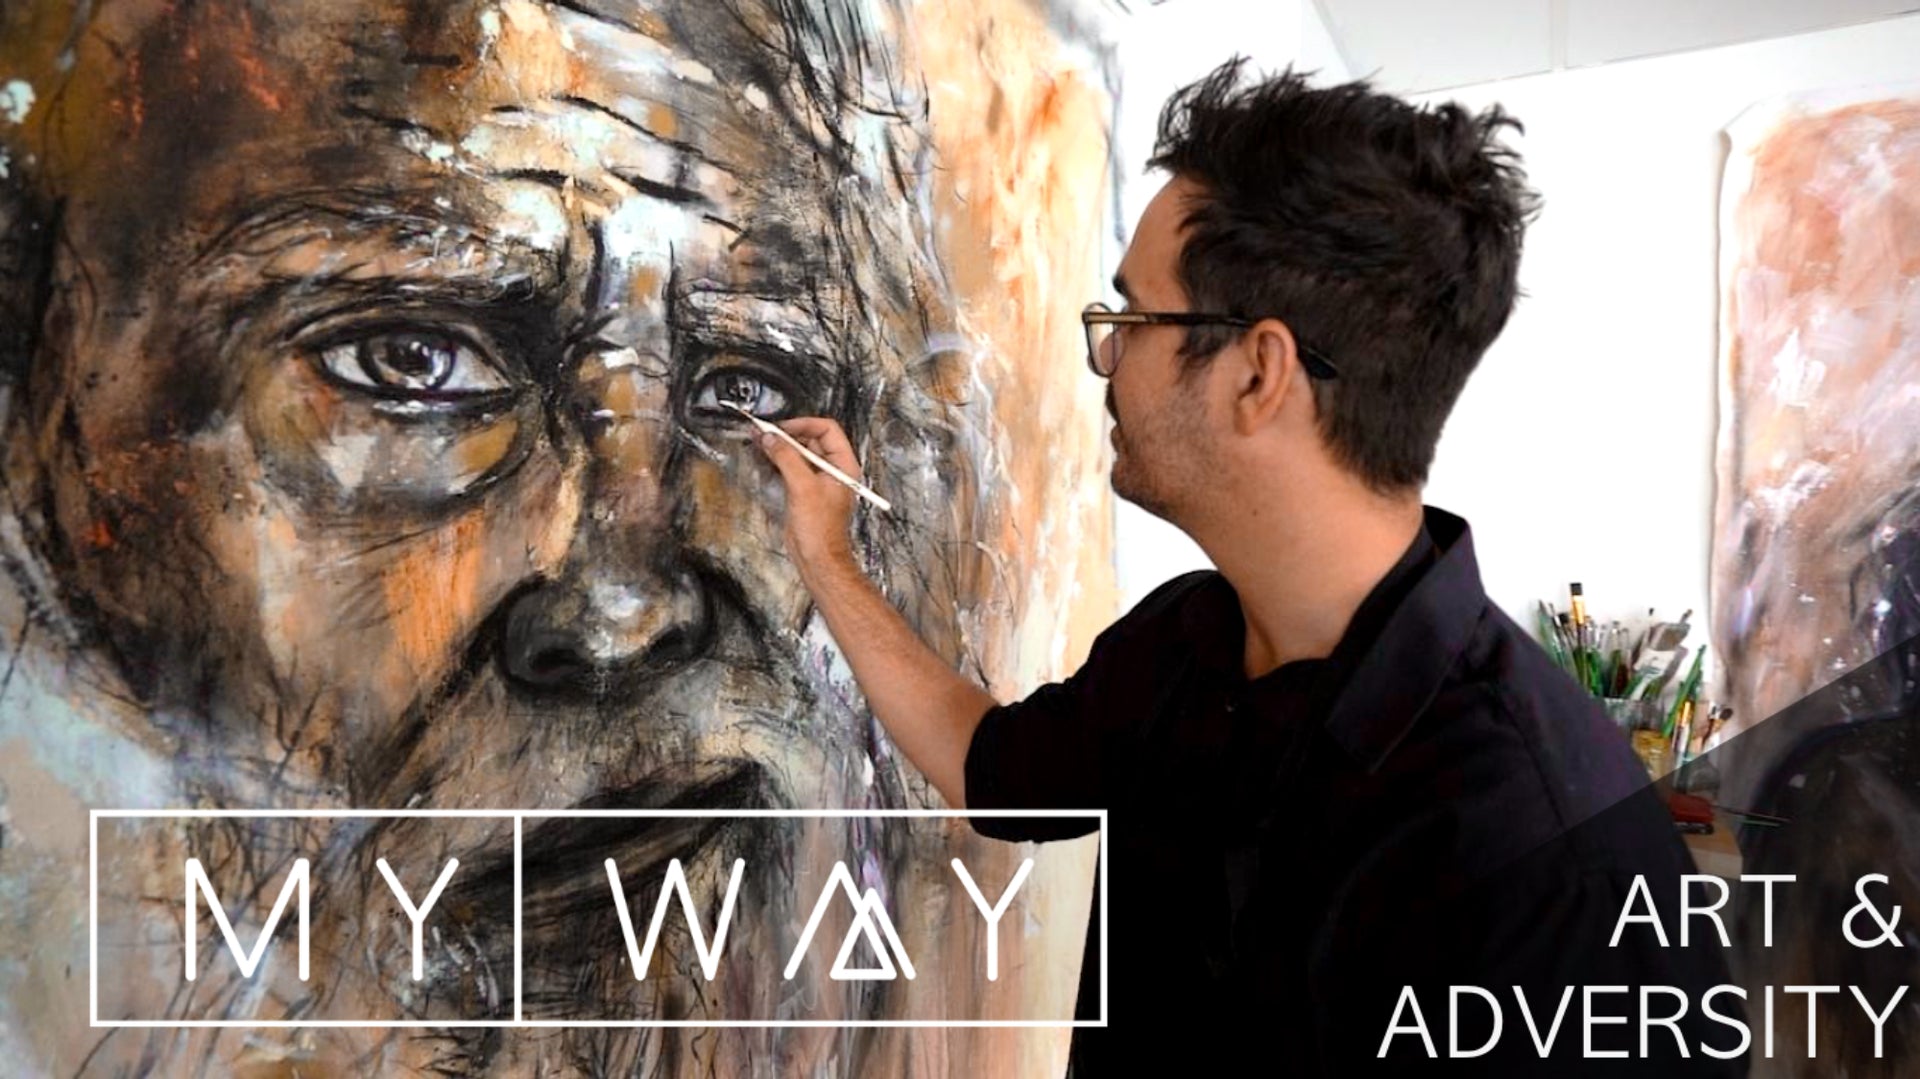 Load video: My Way Program - About Jet James, his life and art